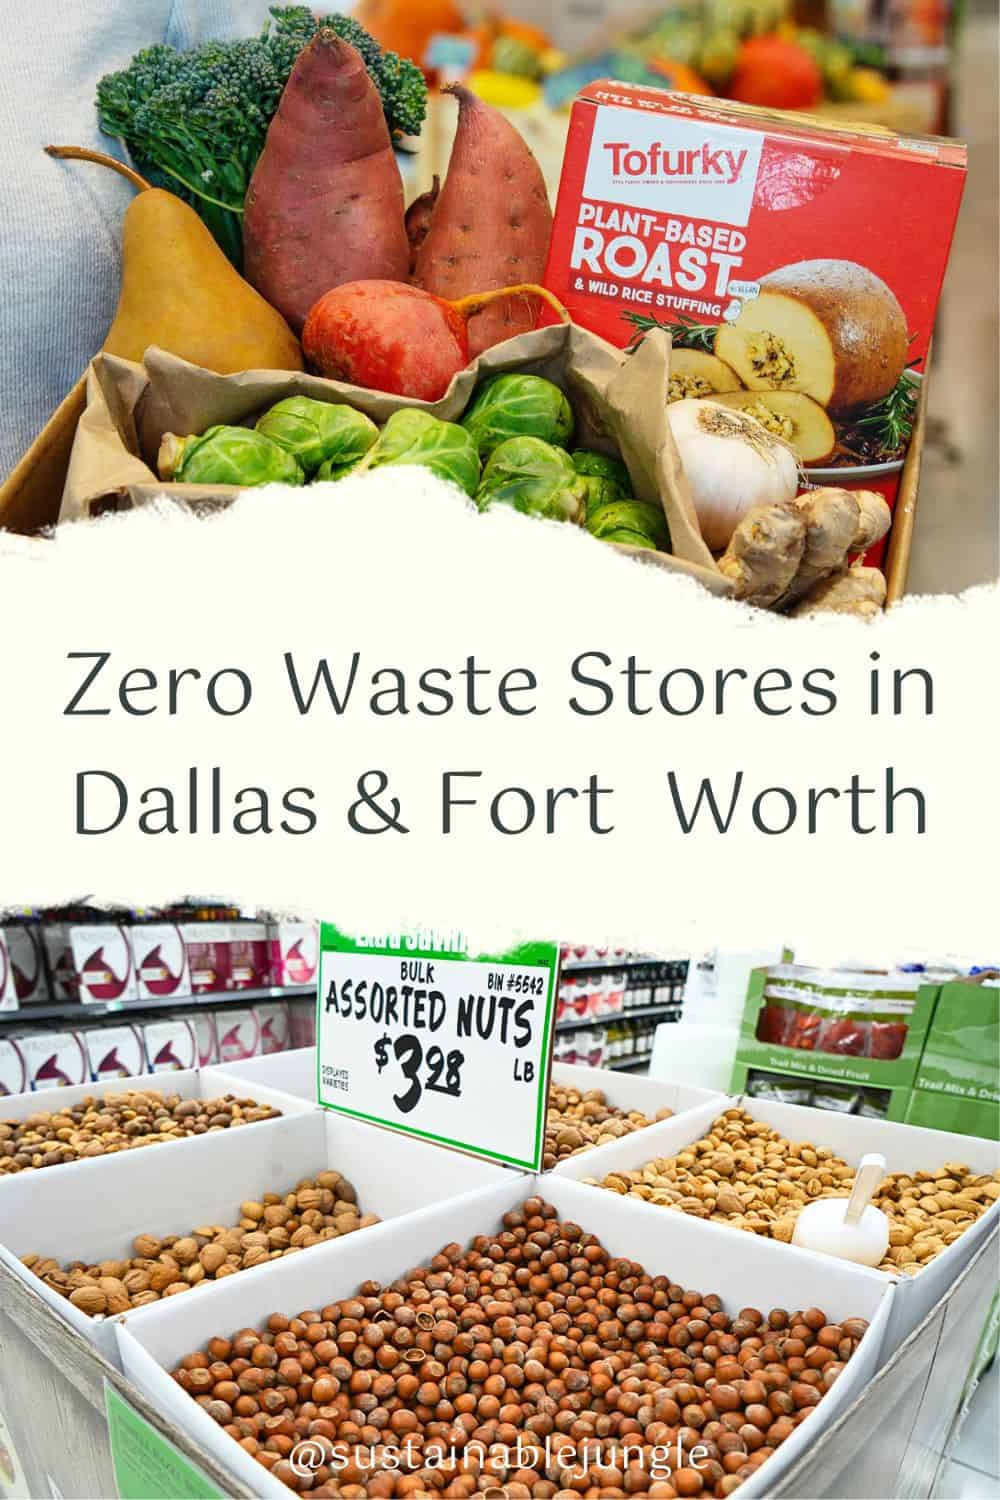 Dallas & Fort Worth Zero Waste Stores For Texas-Sized Sustainability Images by Natural Grocers and Winco #zerowastestoredallas #bestzerowastestoresdallas #bulkstoresdallas #zerowastestoresforthworth #zerowastestoredallasforthworth #sustainablejungle